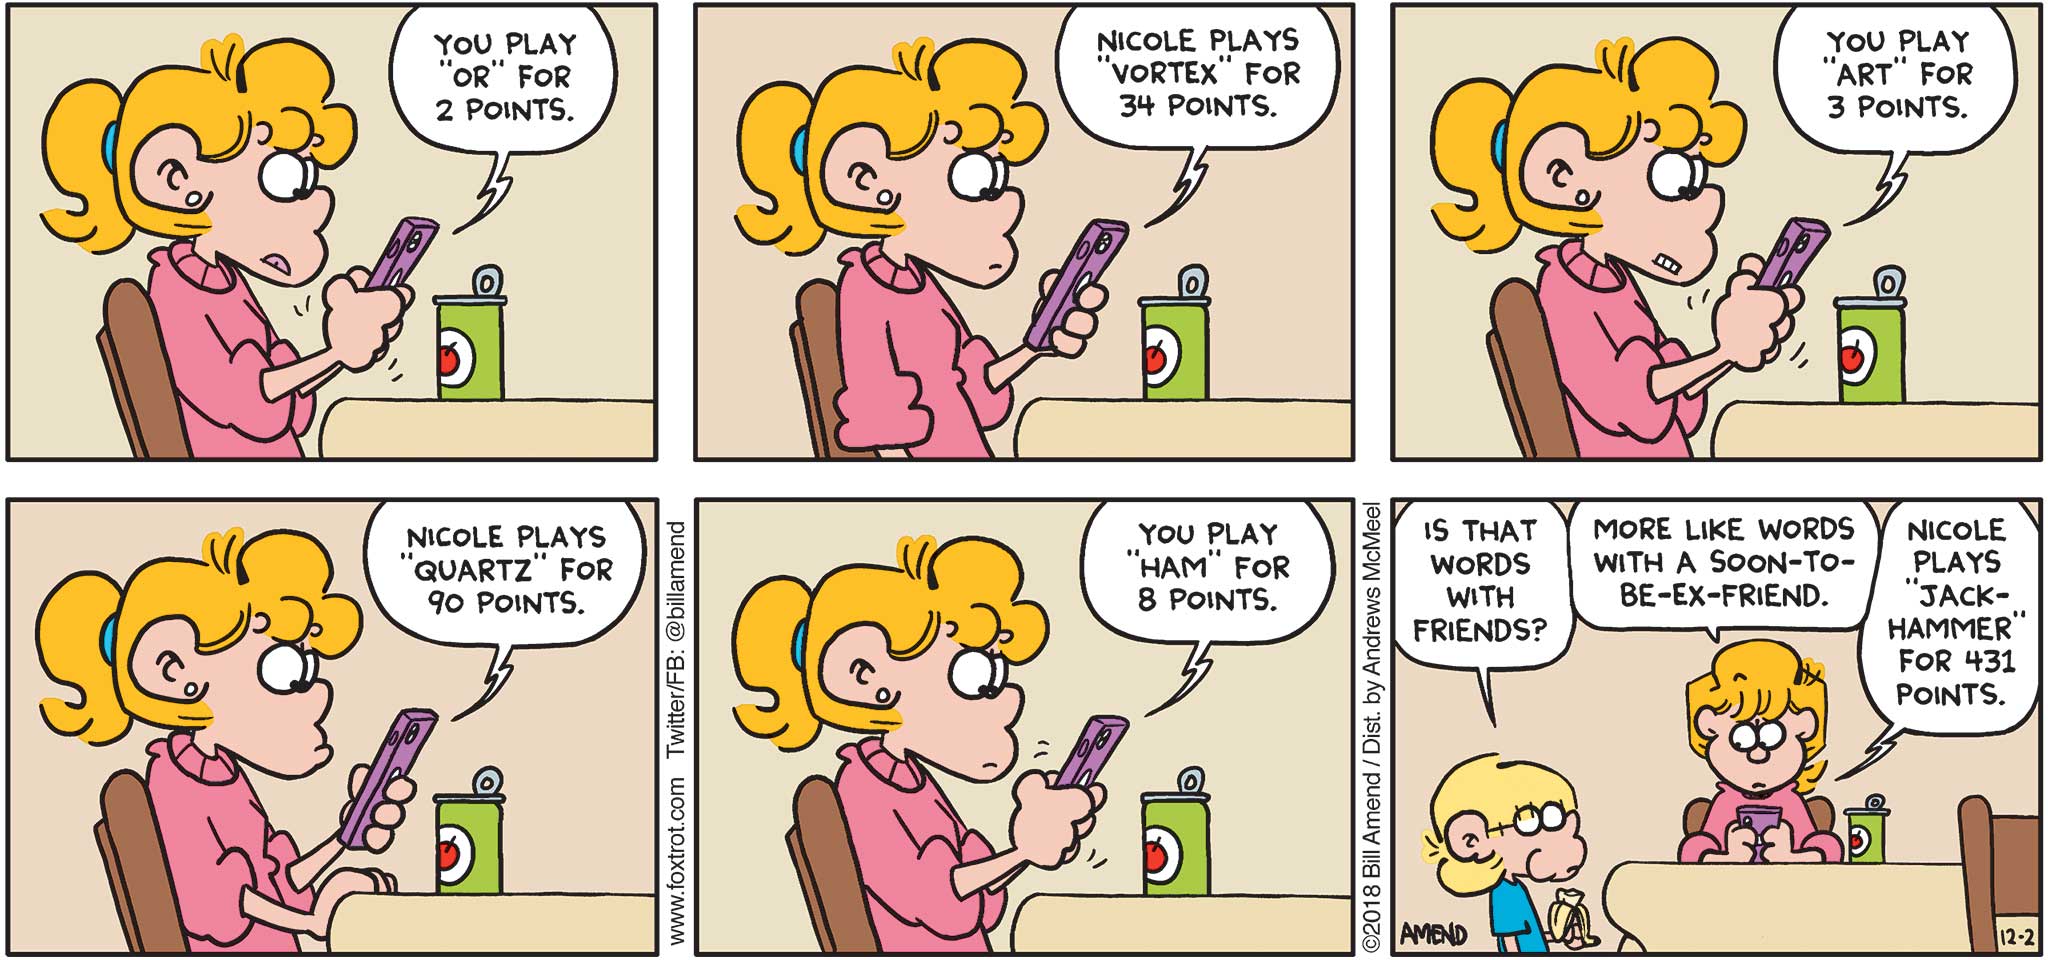 FoxTrot by Bill Amend - "Fightin' Words" published December 2, 2018 - [Paige playing Words With Friends on her phone against Nicole] Words With Friends says: You play "or" for 2 point. Nicole plays "vortex" for 34 points. You play "art" for 3 points. Nicole plays "quartz" for 90 points. You play "ham" for 8 points. Jason says: Is that Words With Friends? Paige says: More like Words With A Soon-To-Be-Ex-Friend. Words With Friends says: Nicole plays "jackhammer" for 431 points. 